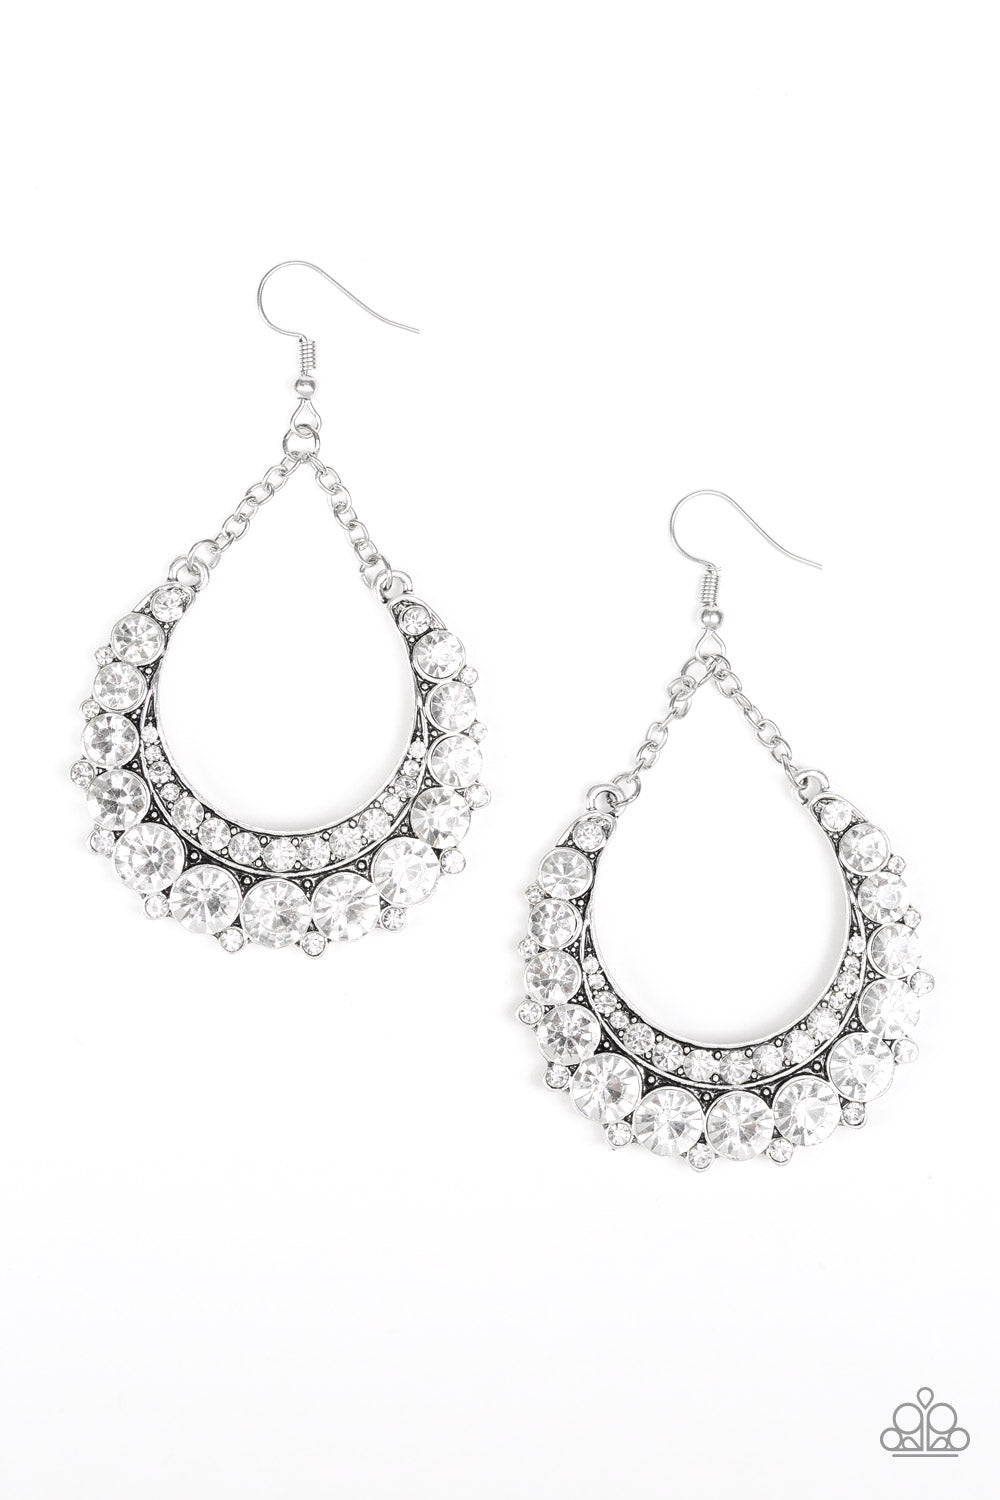 ONCE IN A SHOWTIME - WHITE RHINESTONE EARRINGS